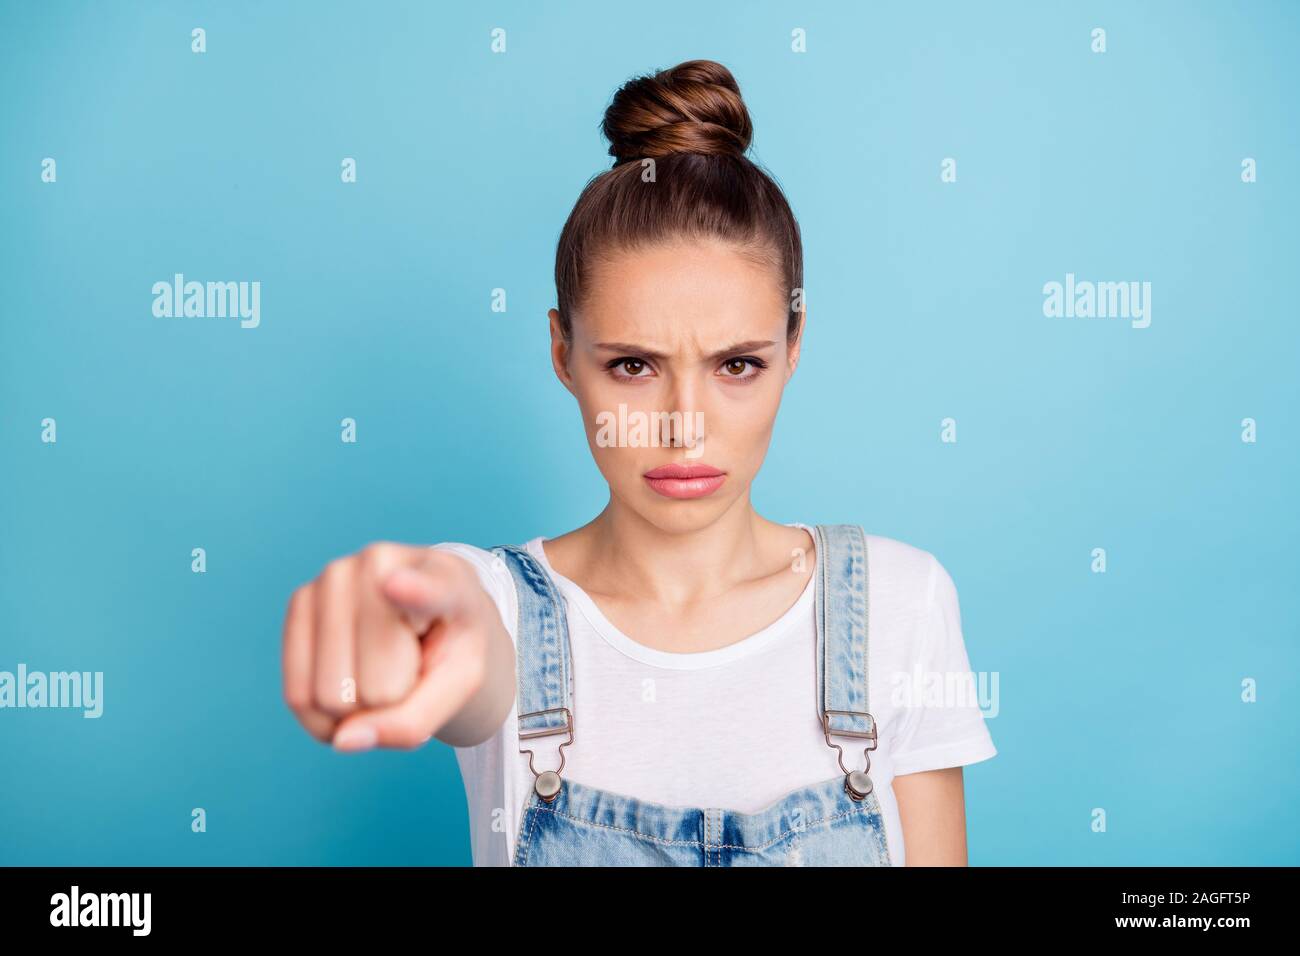 Portrait of sullen girl pointing with her index finger wearing white t-shirt denim jeans overalls isolated over blue background Stock Photo